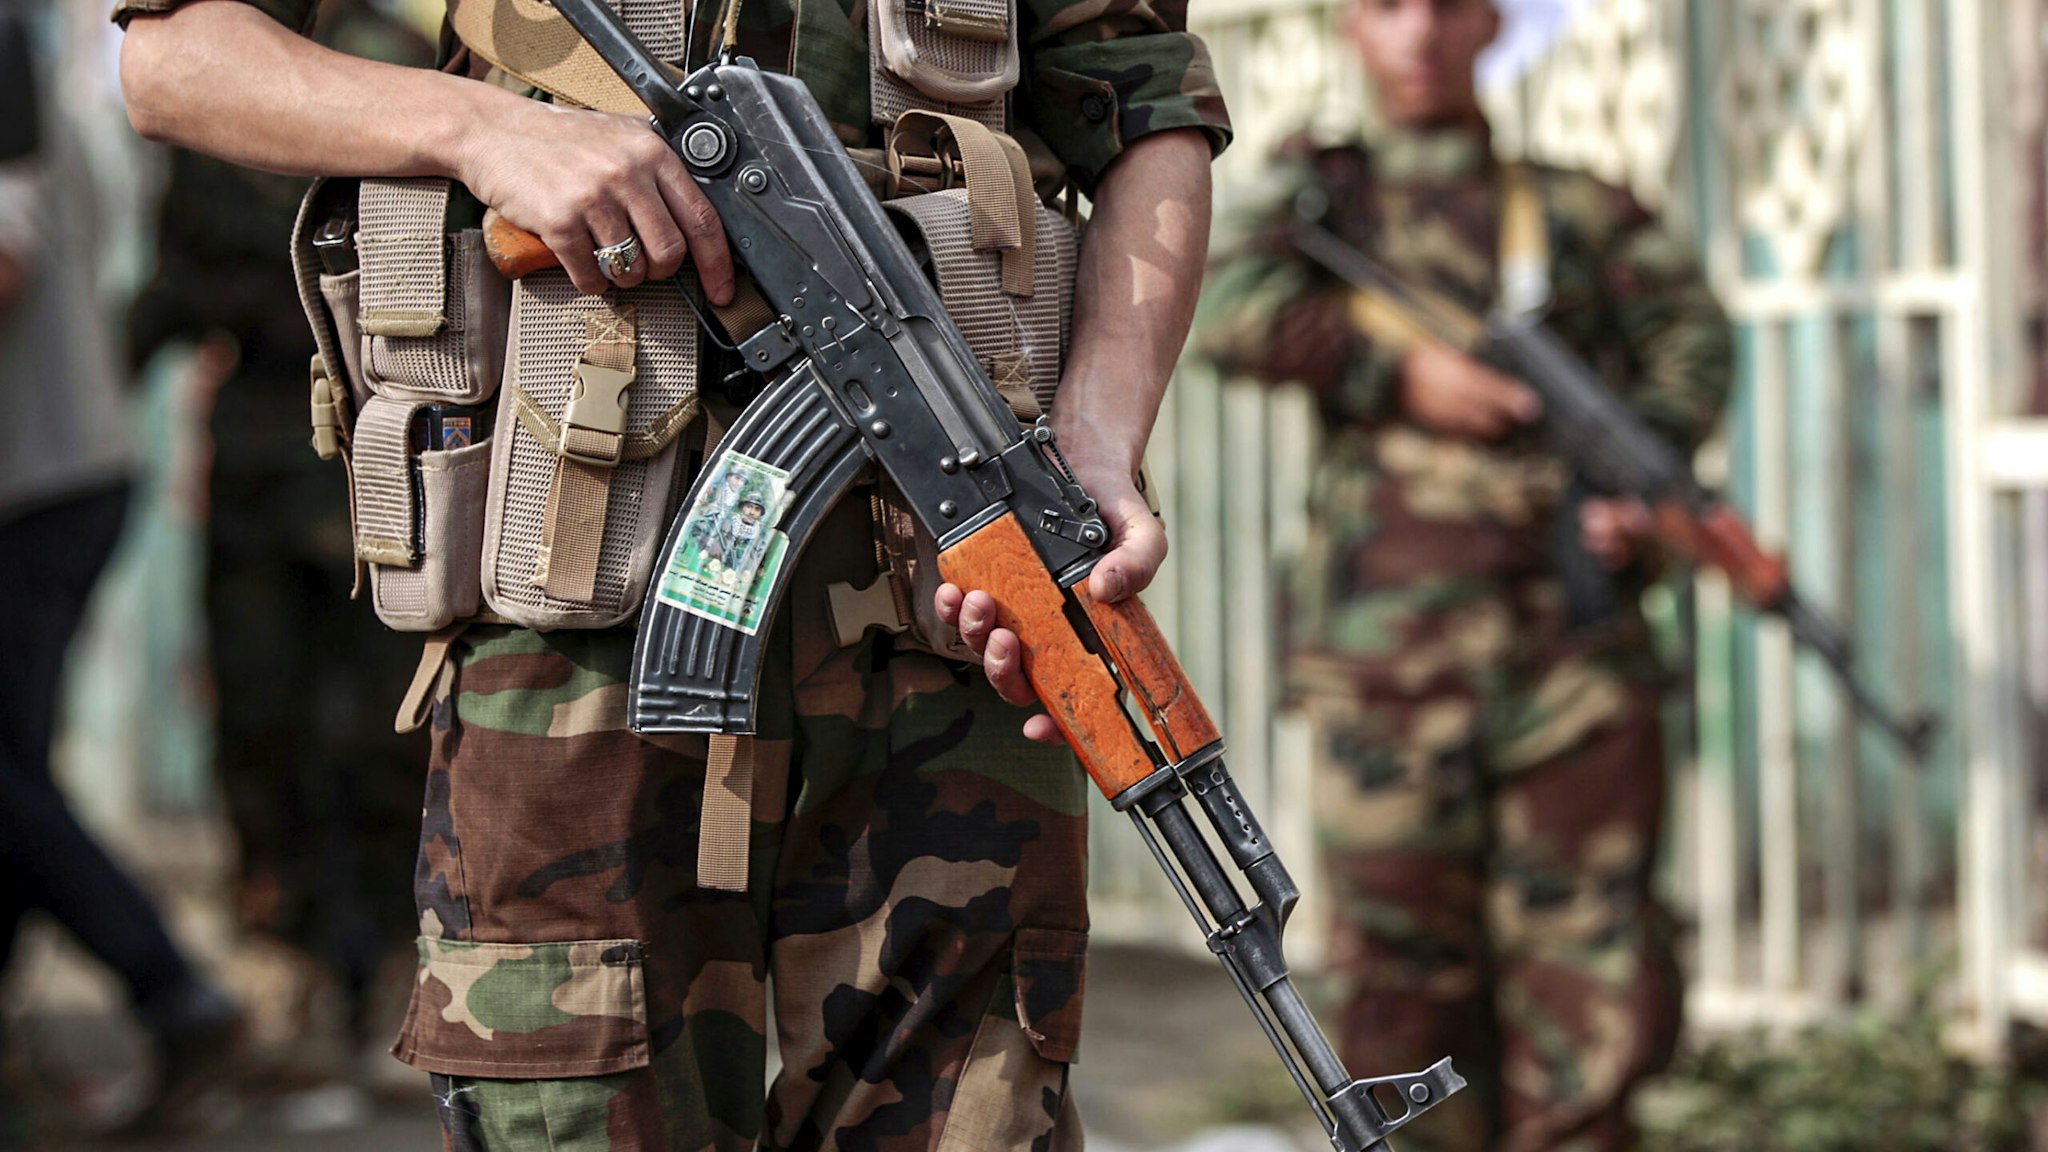 A fighter loyal to Yemen's Huthi rebels holds a Kalashnikov assault rifle showing a picture of other slain comrades as he stands guard during a rally commemorating the Shiite Muslim religious holiday of Ashura in the capital Sanaa on September 10, 2019. - Ashura is commemorated by Shiite Muslims worldwide and marks the climax of mourning rituals in the Islamic month of Muharram for the 7th century killing of Imam Hussein, the grandson of Prophet Mohammed, in the Battle of Karbala in 680 AD.